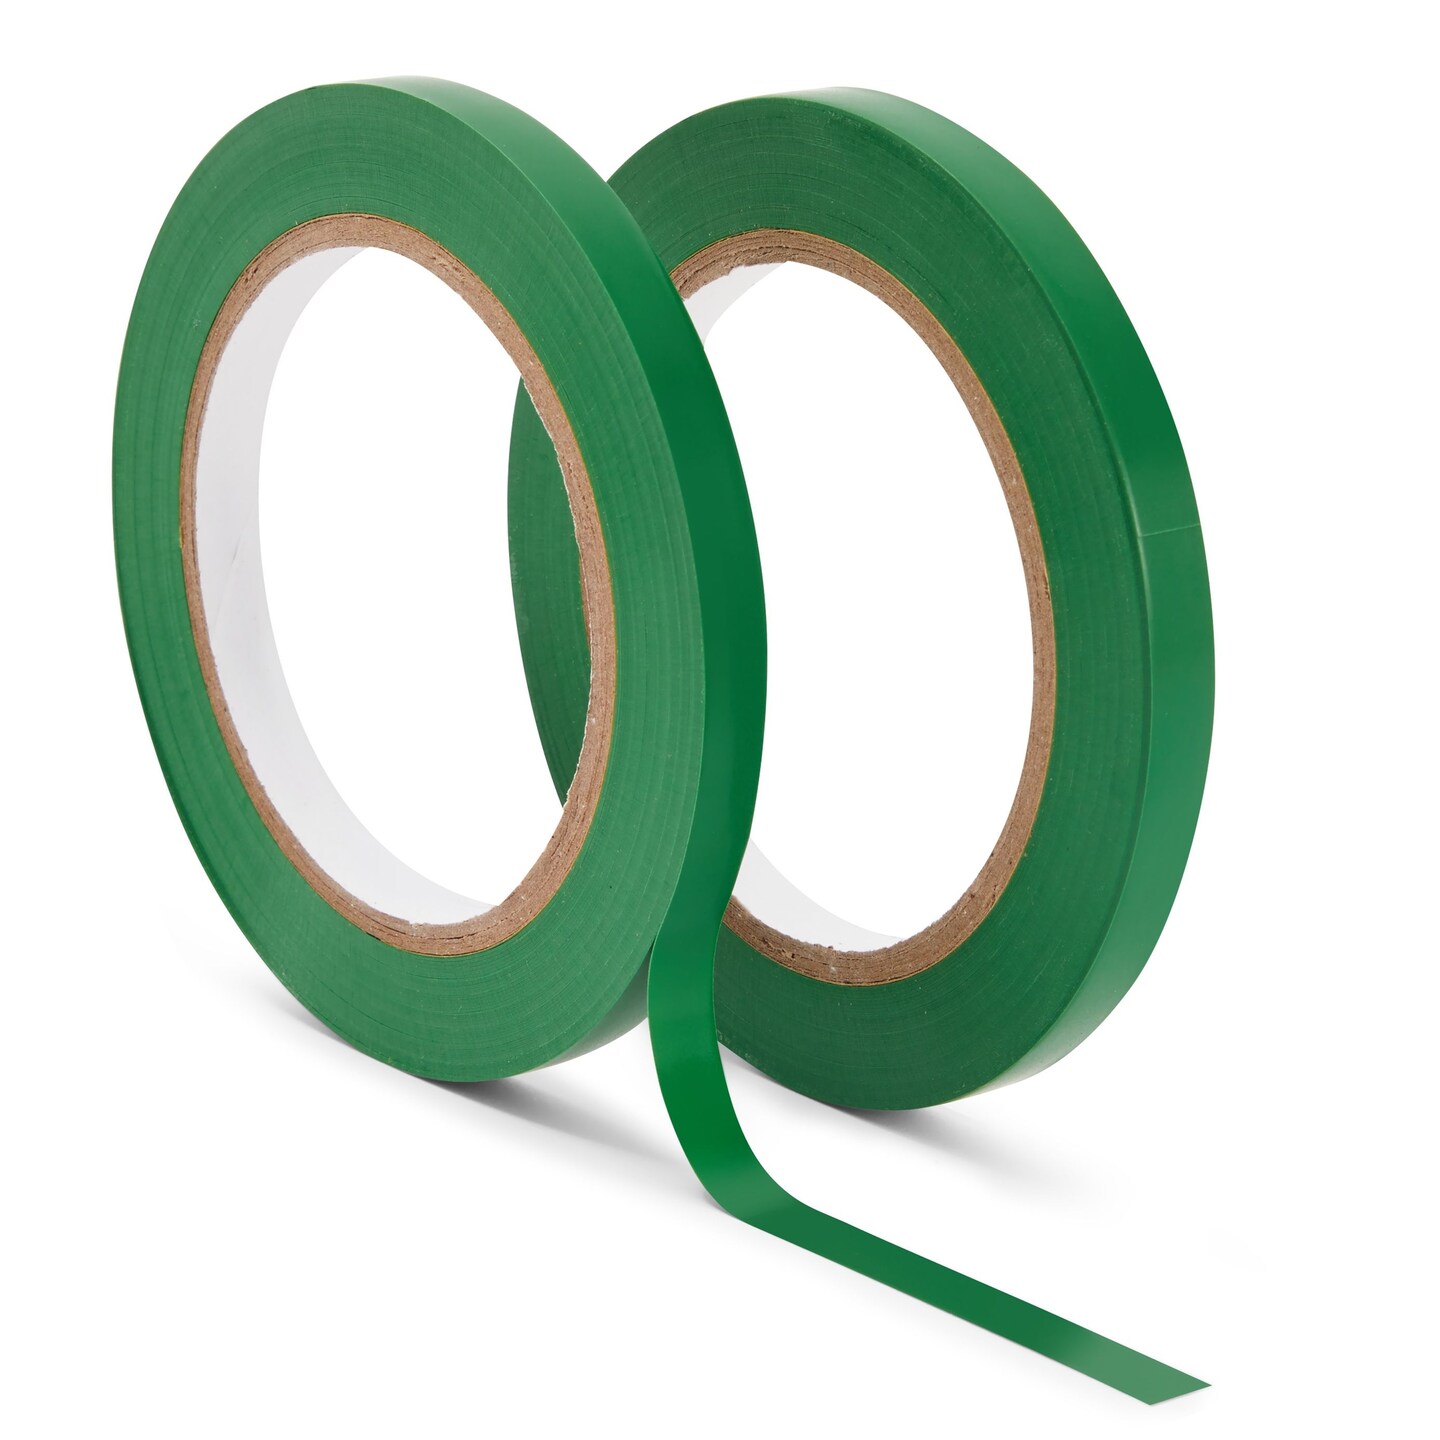 2 Rolls Vinyl Pinstripe Fine Line Tape, 3/8-Inch Wide by 36-Yards Long Each, Gym Floor Tape for Marking Warehouse Grid Lines (72 Yards Total, Kelly Green)